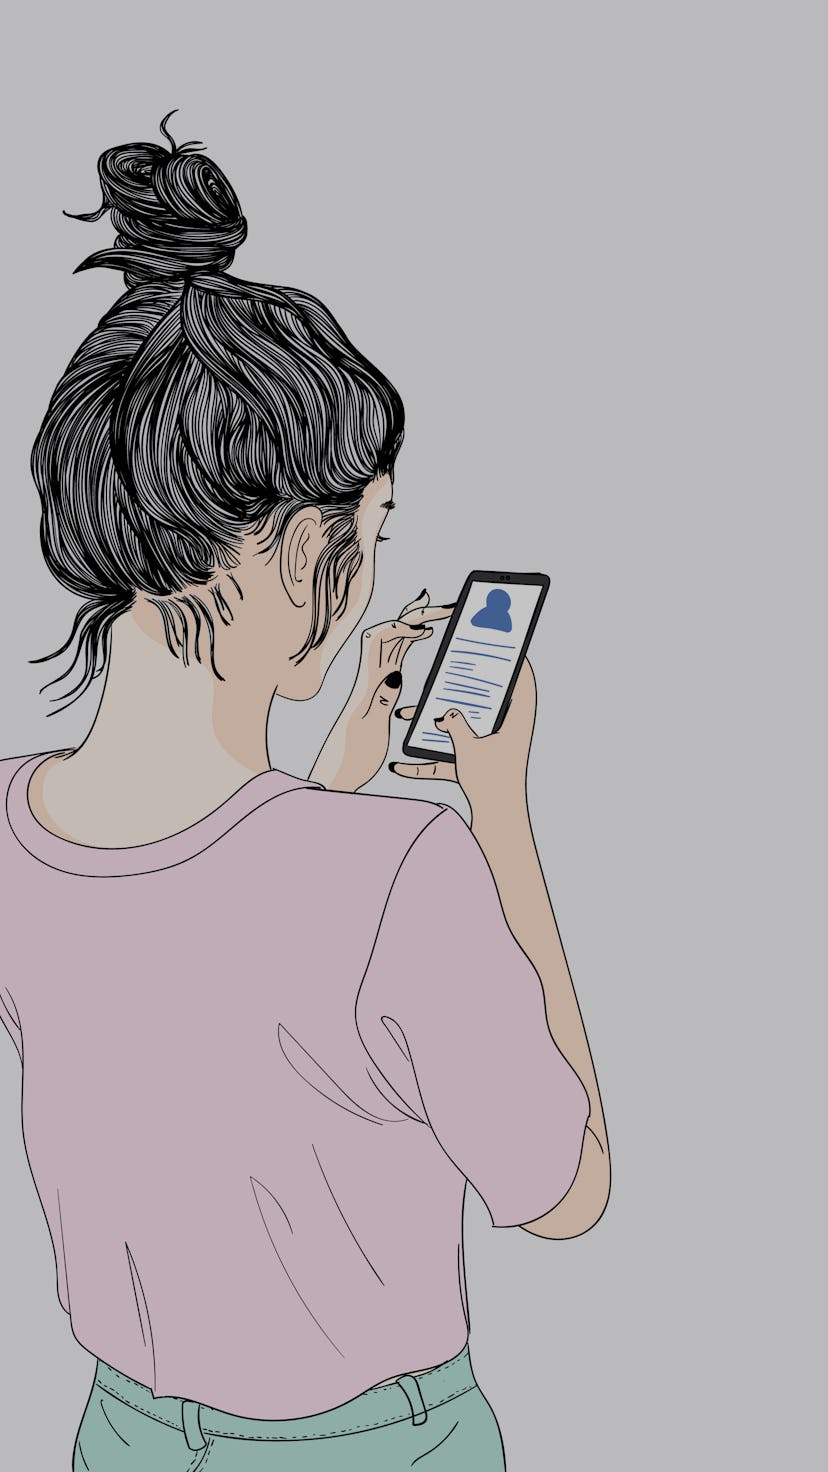 Women are playing smartphones. She talked to friends in social media.Doodle art concept, illustratio...